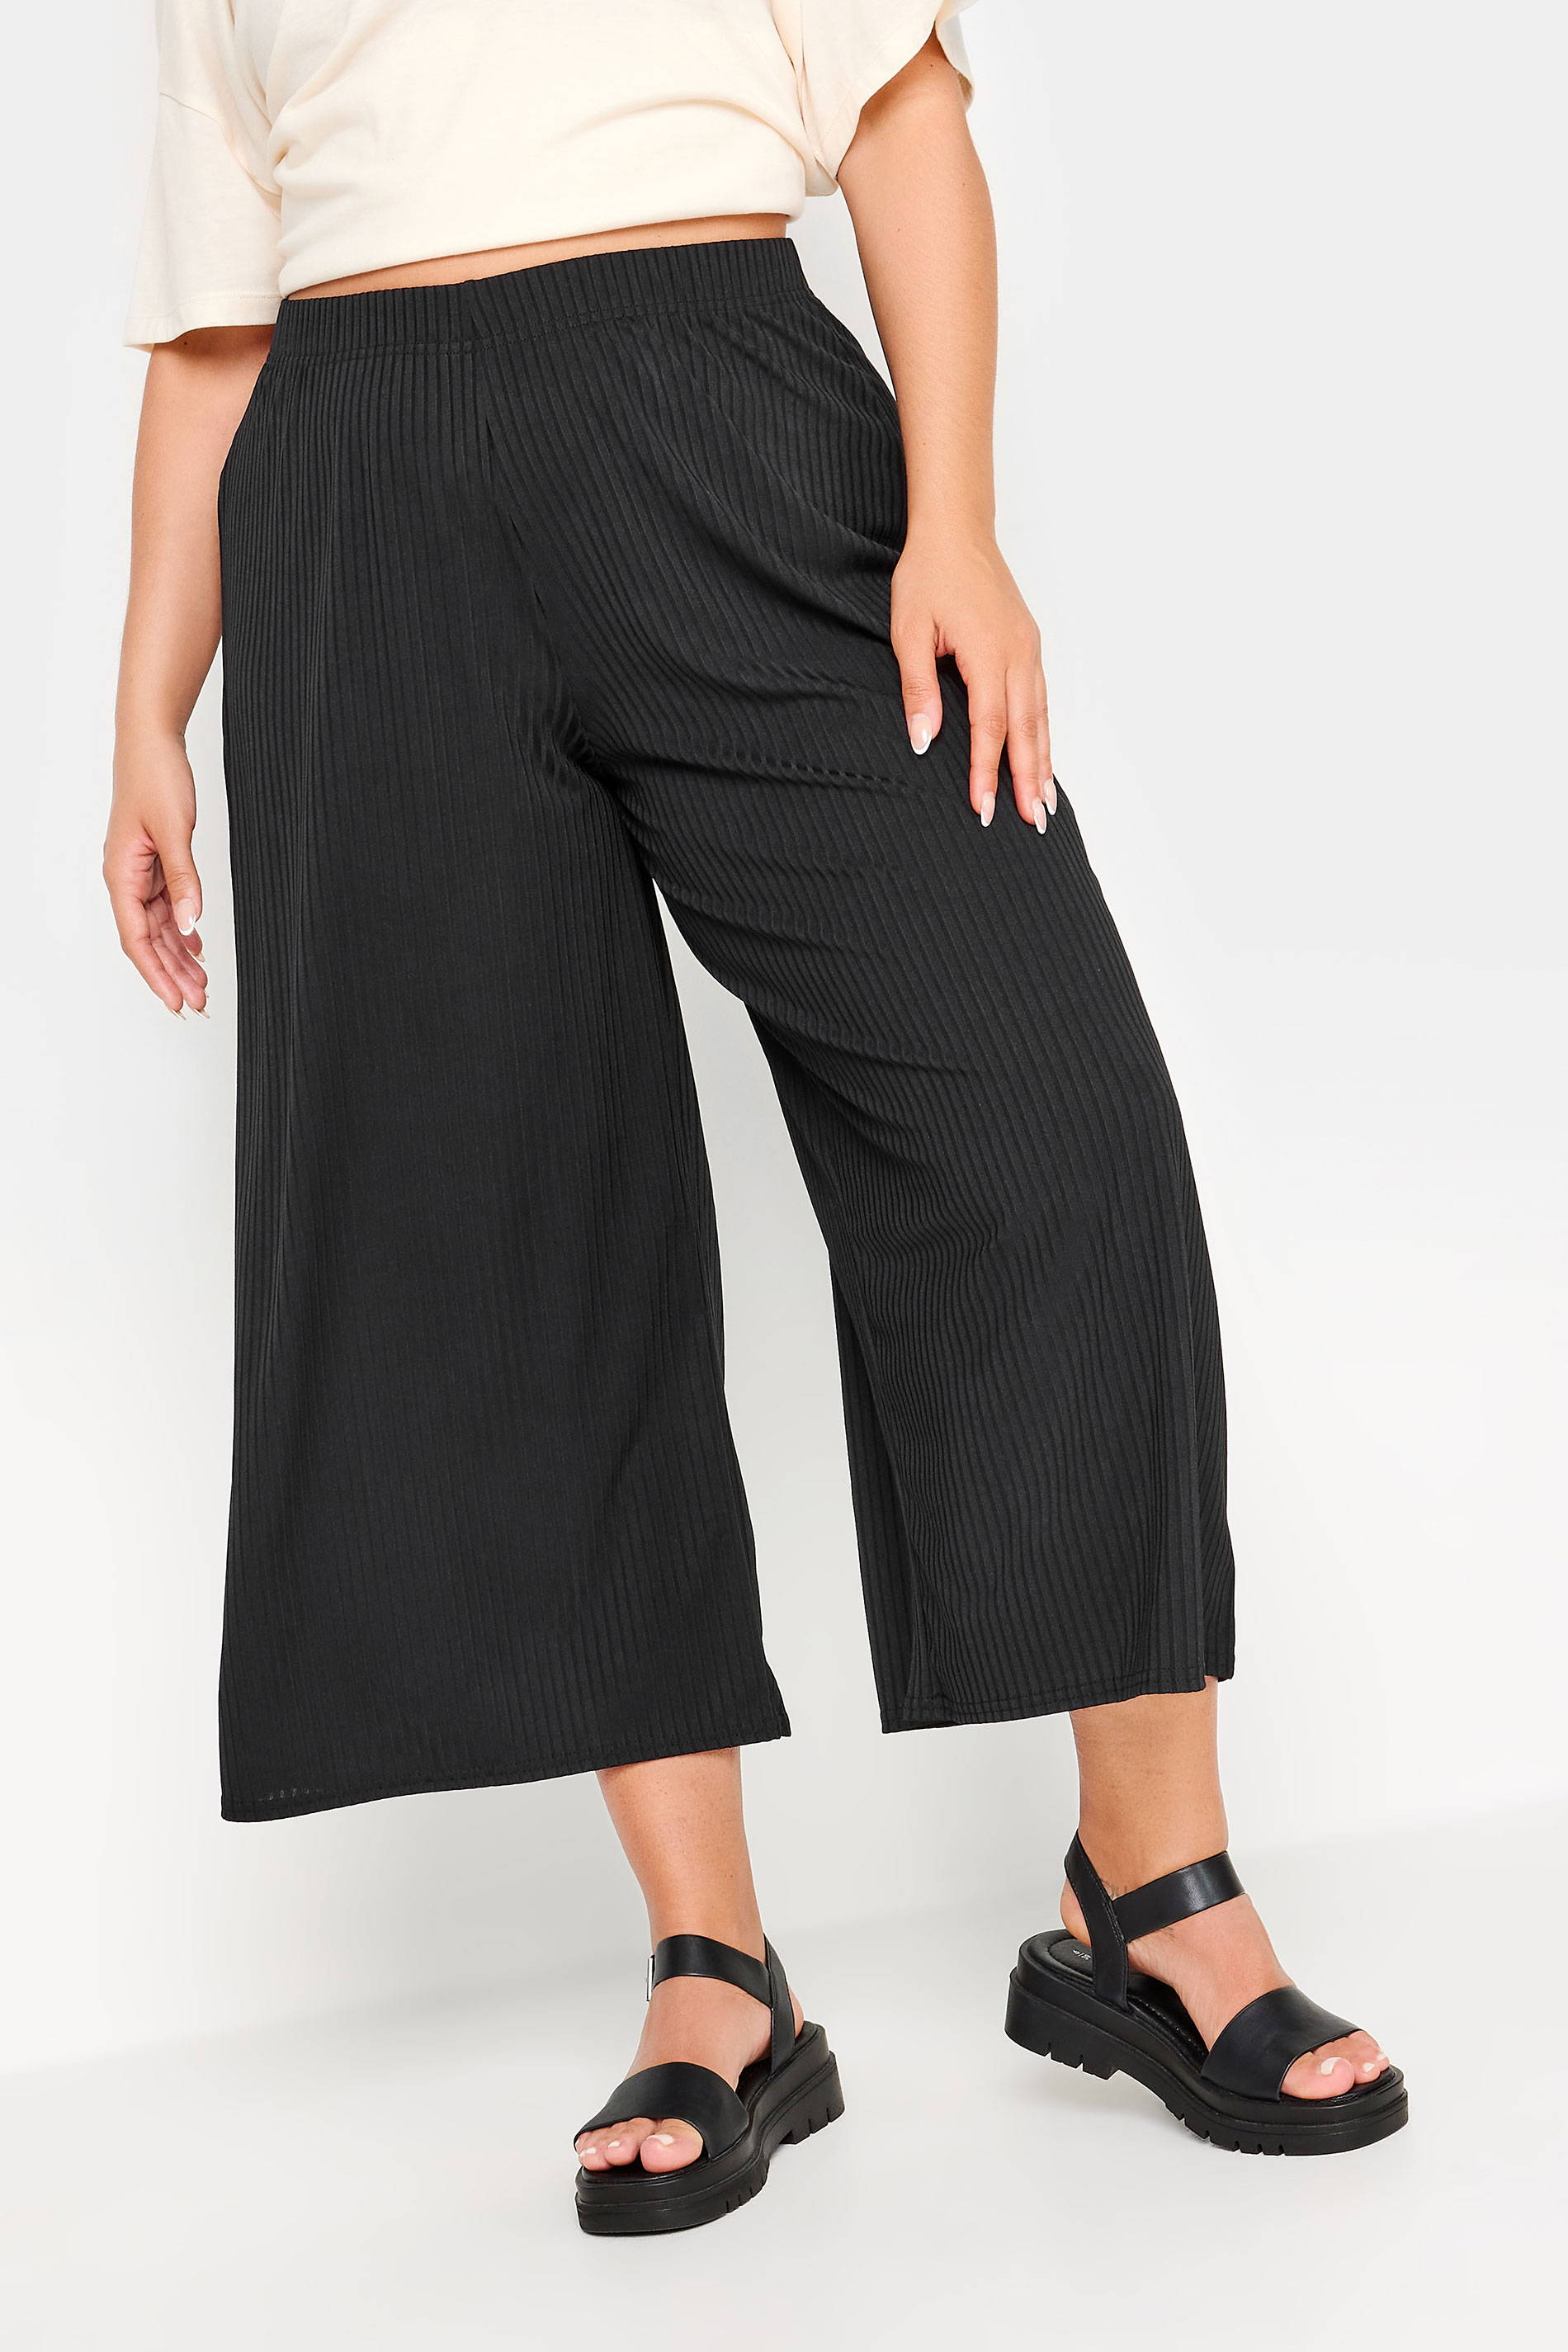 LIMITED COLLECTION Plus Size Black Ribbed Culottes | Yours Clothing 2